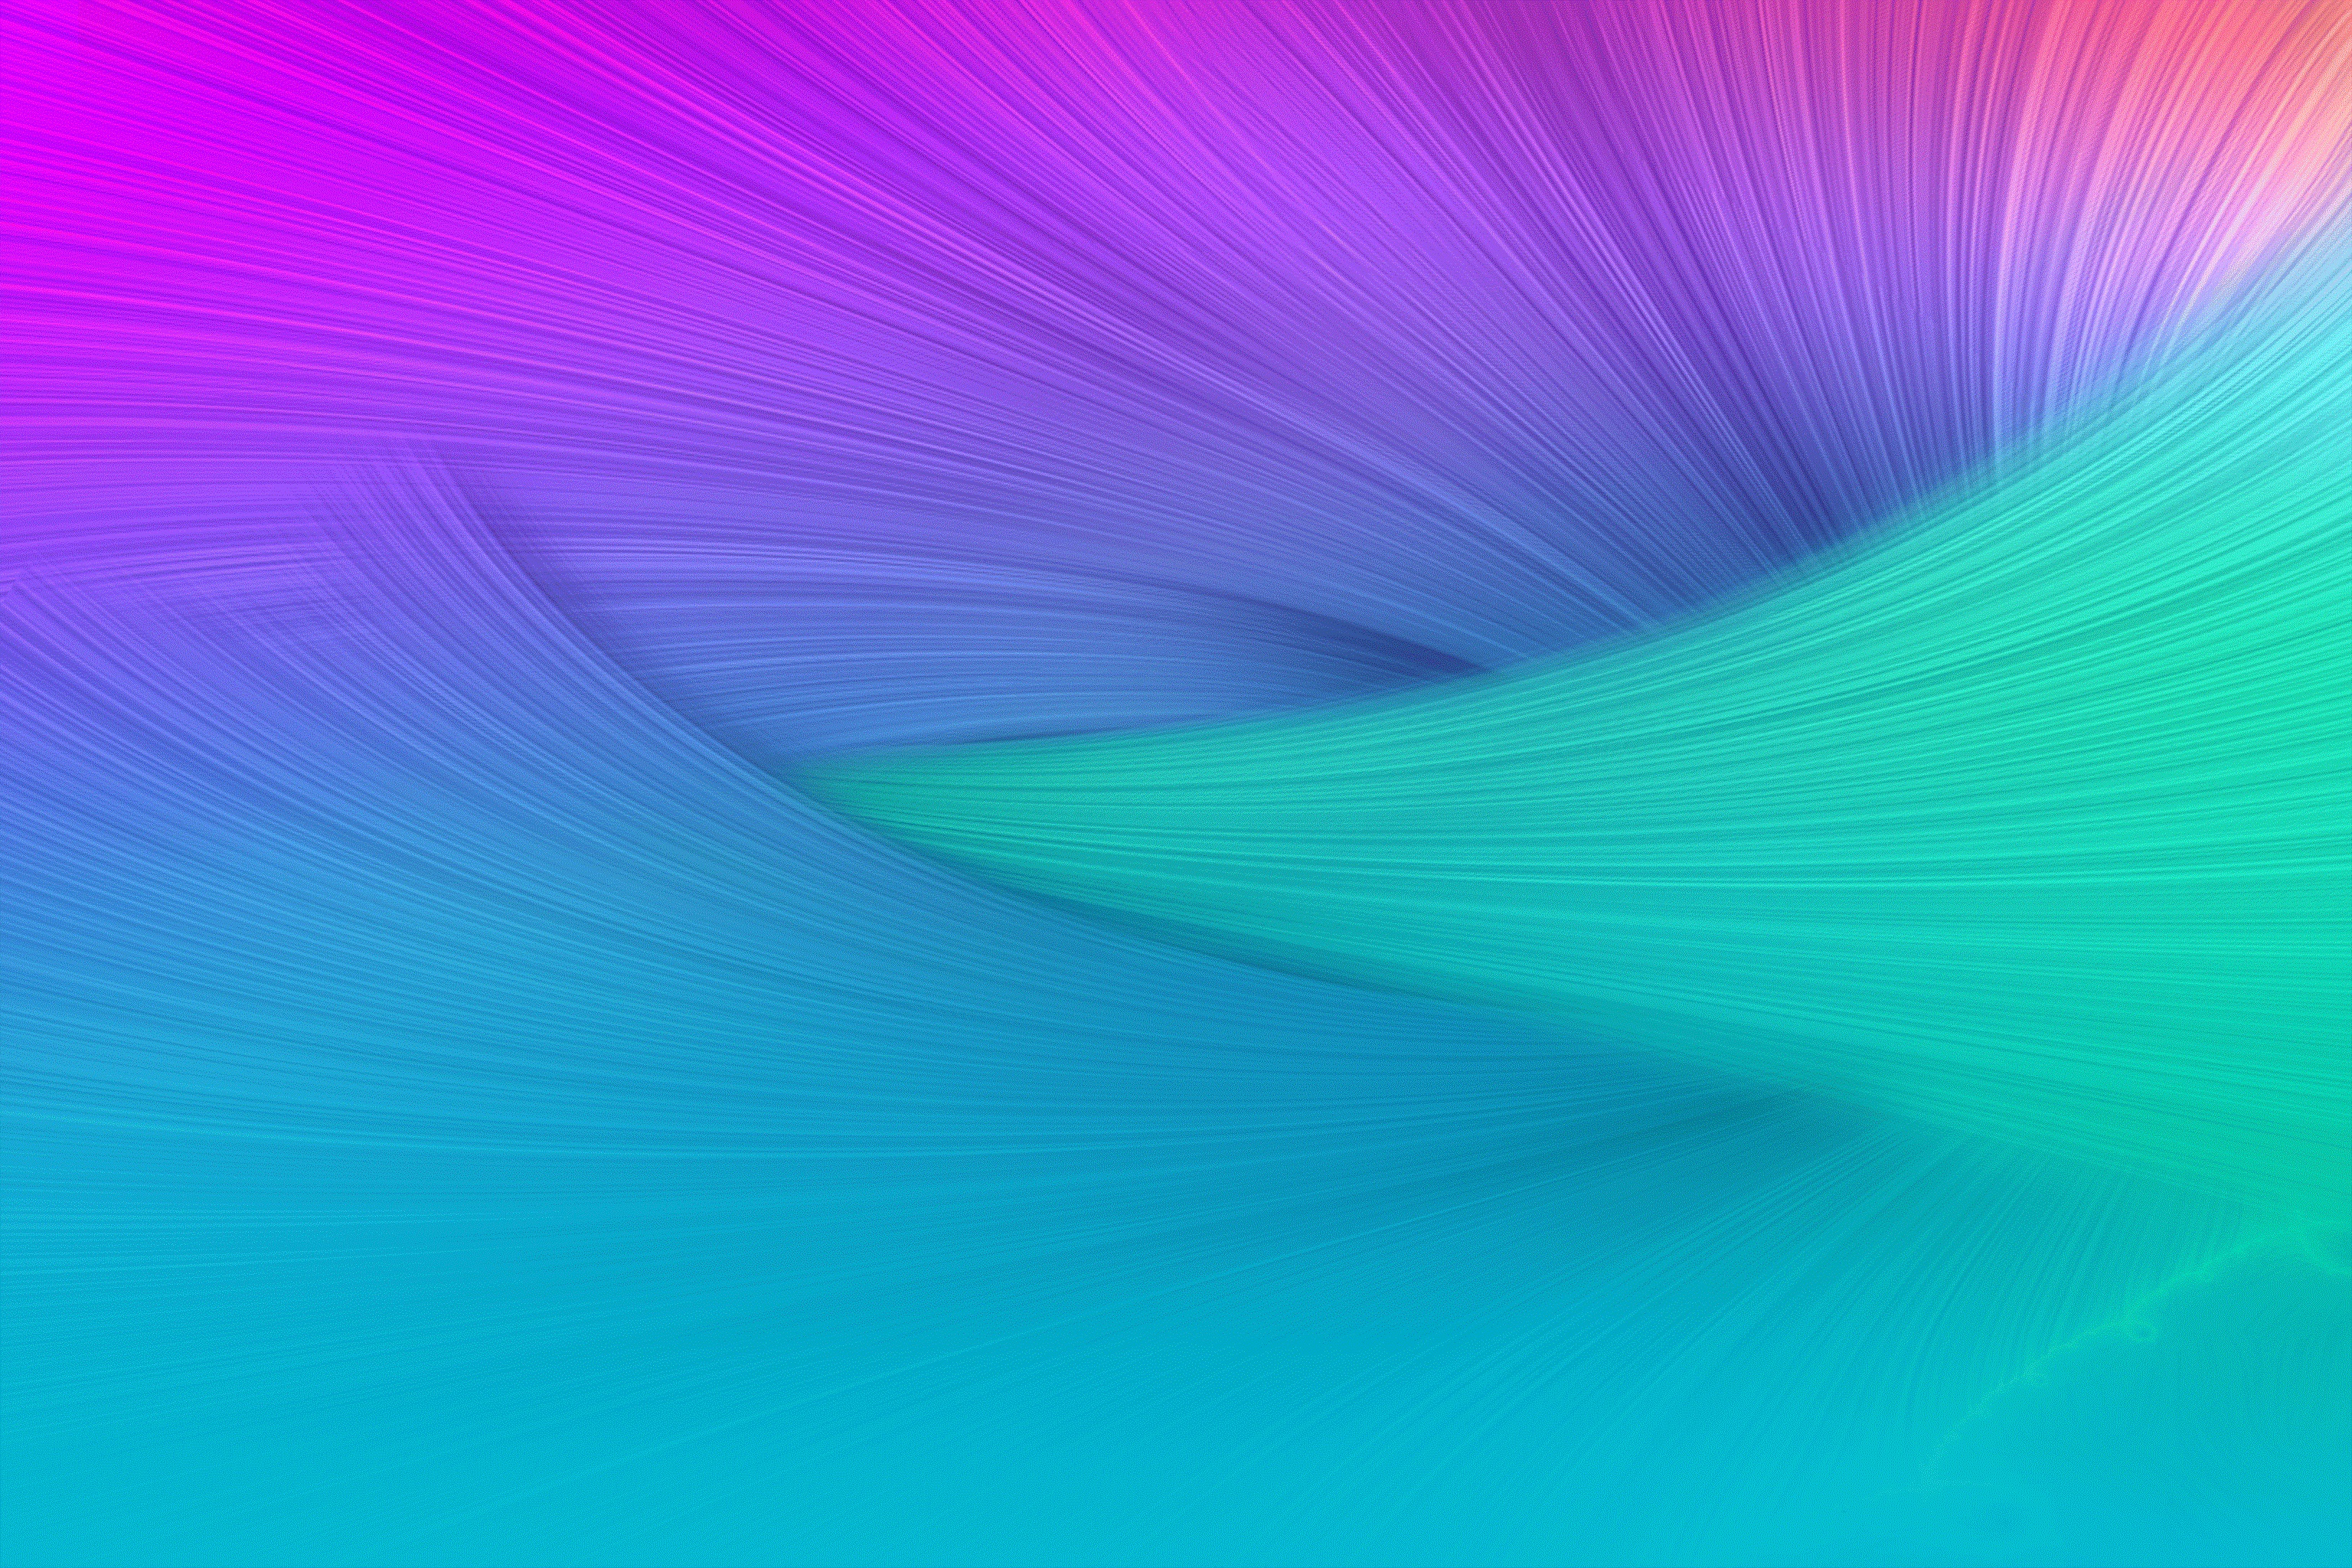 Samsung Note 4 Wallpapers